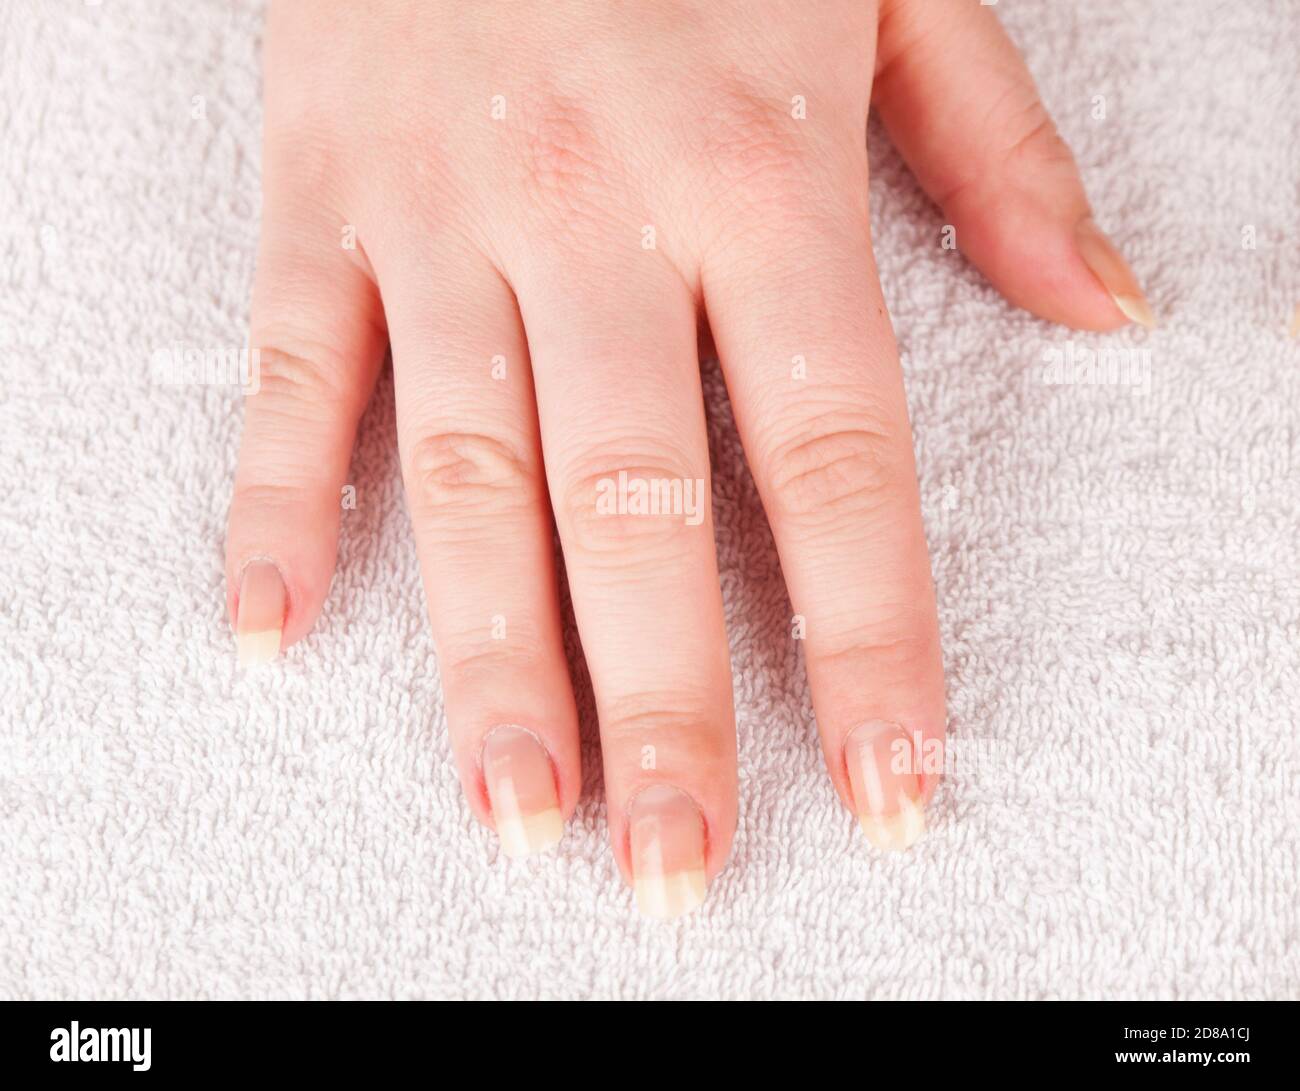 The concept of hand care. Closeup hand before applies nail polish Stock Photo